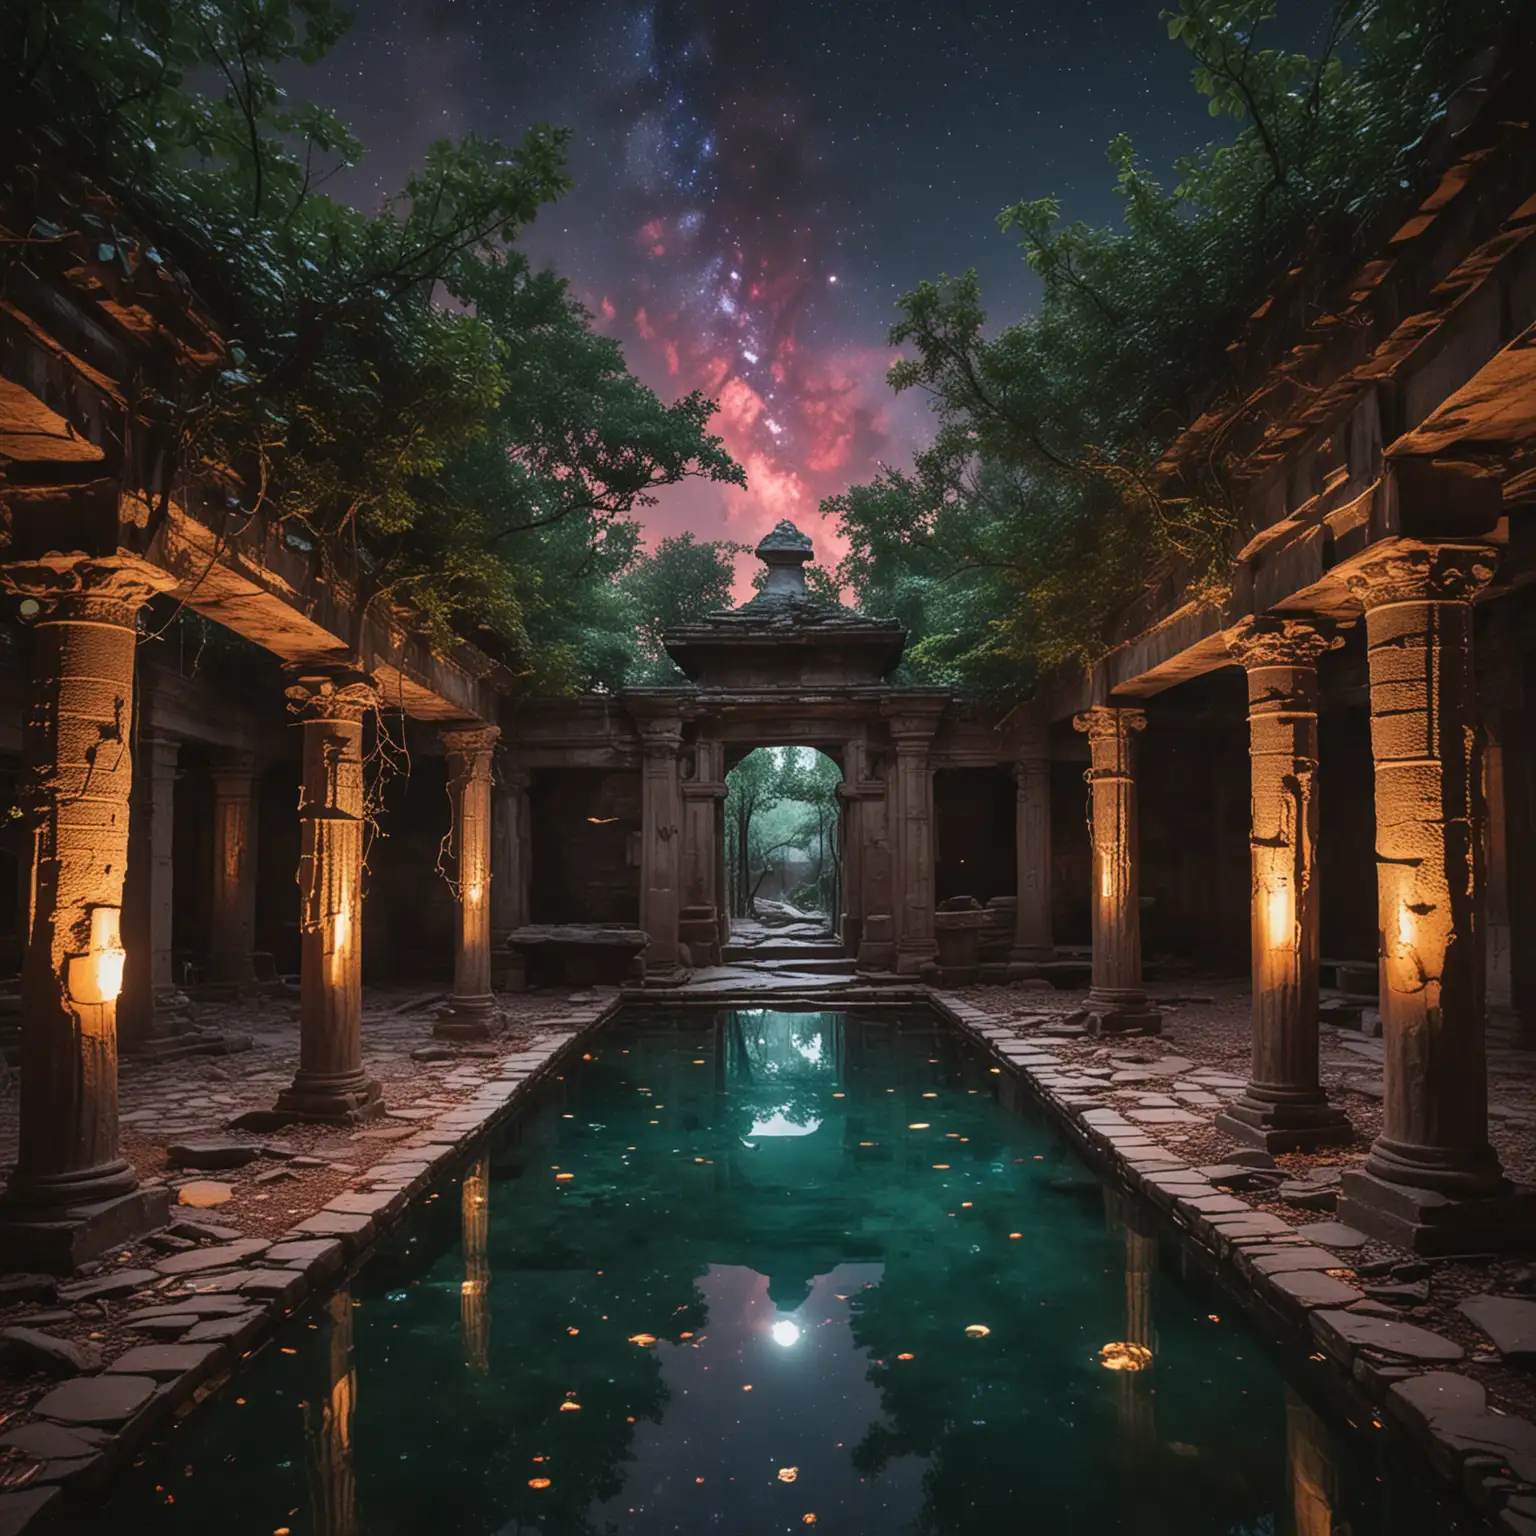 Ancient Temple Courtyard Glowing Fetus Emerges from Enchanted Pool at Night